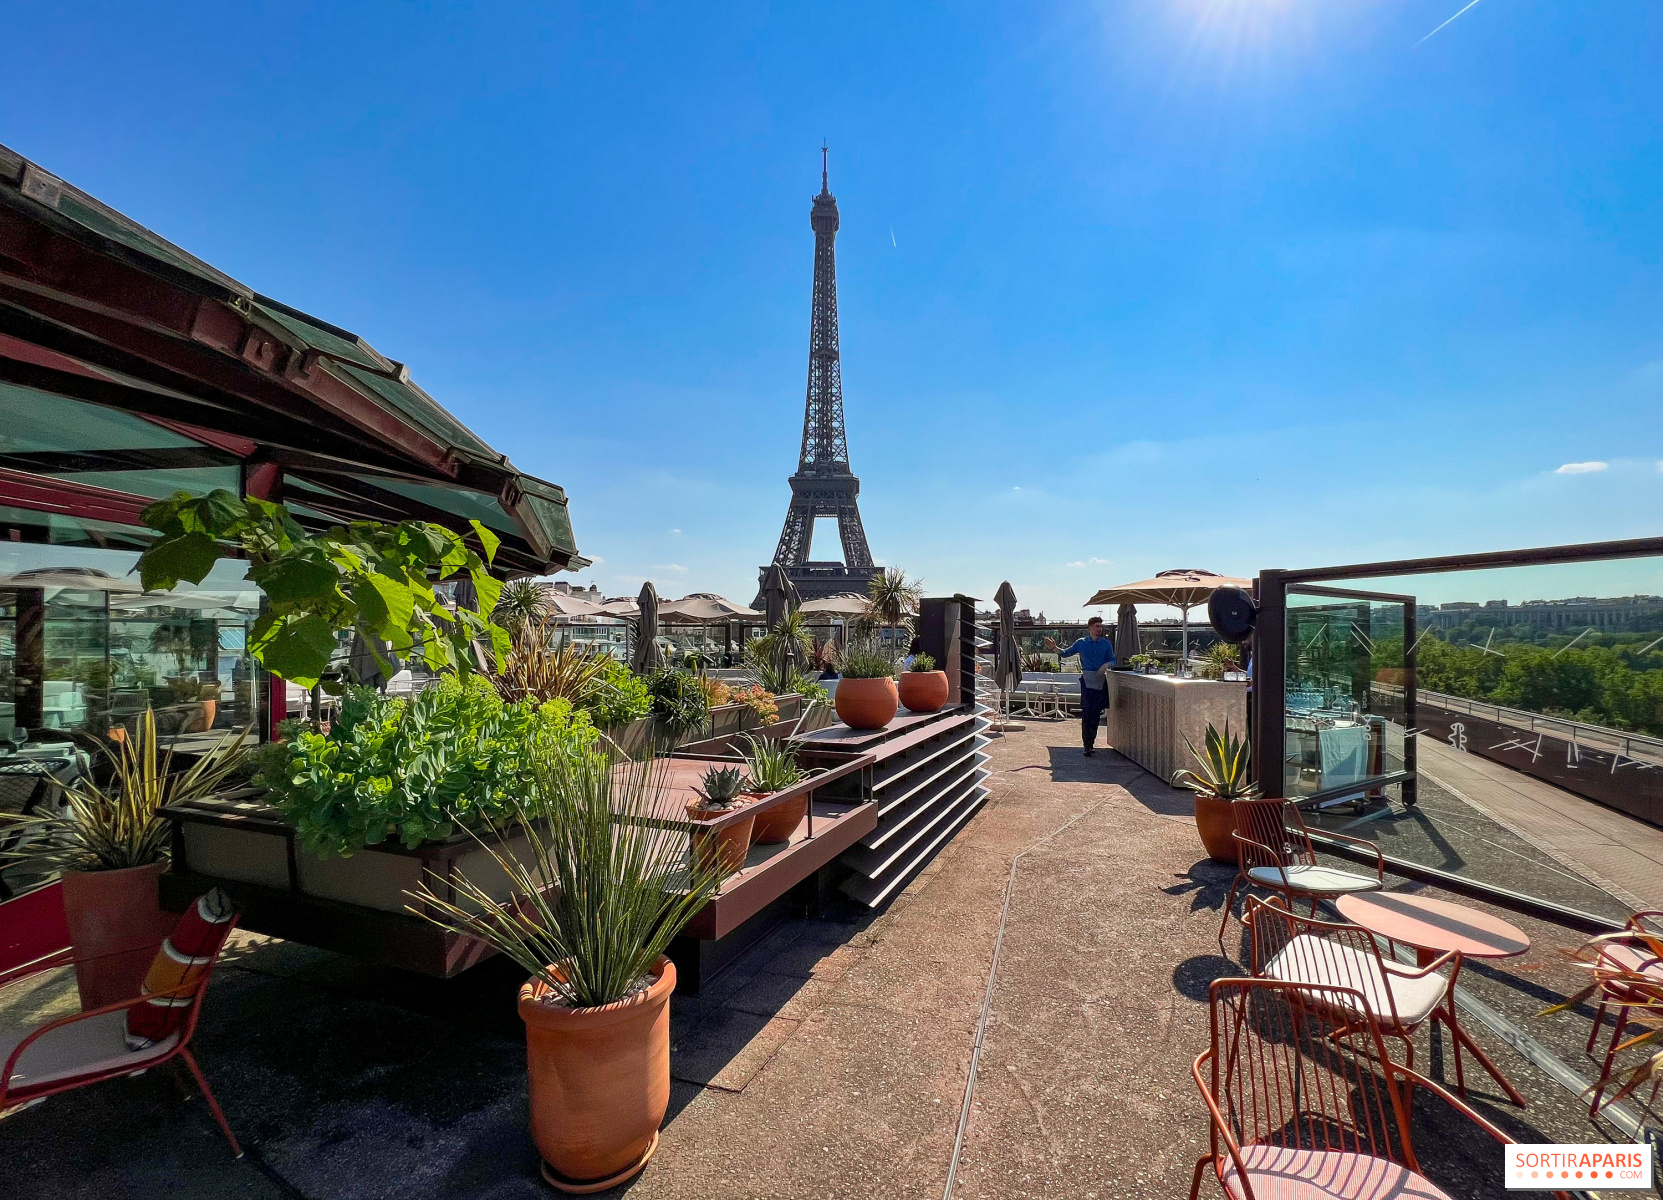 Eiffel Tower, Top of the World and Mandarin Bar named among best